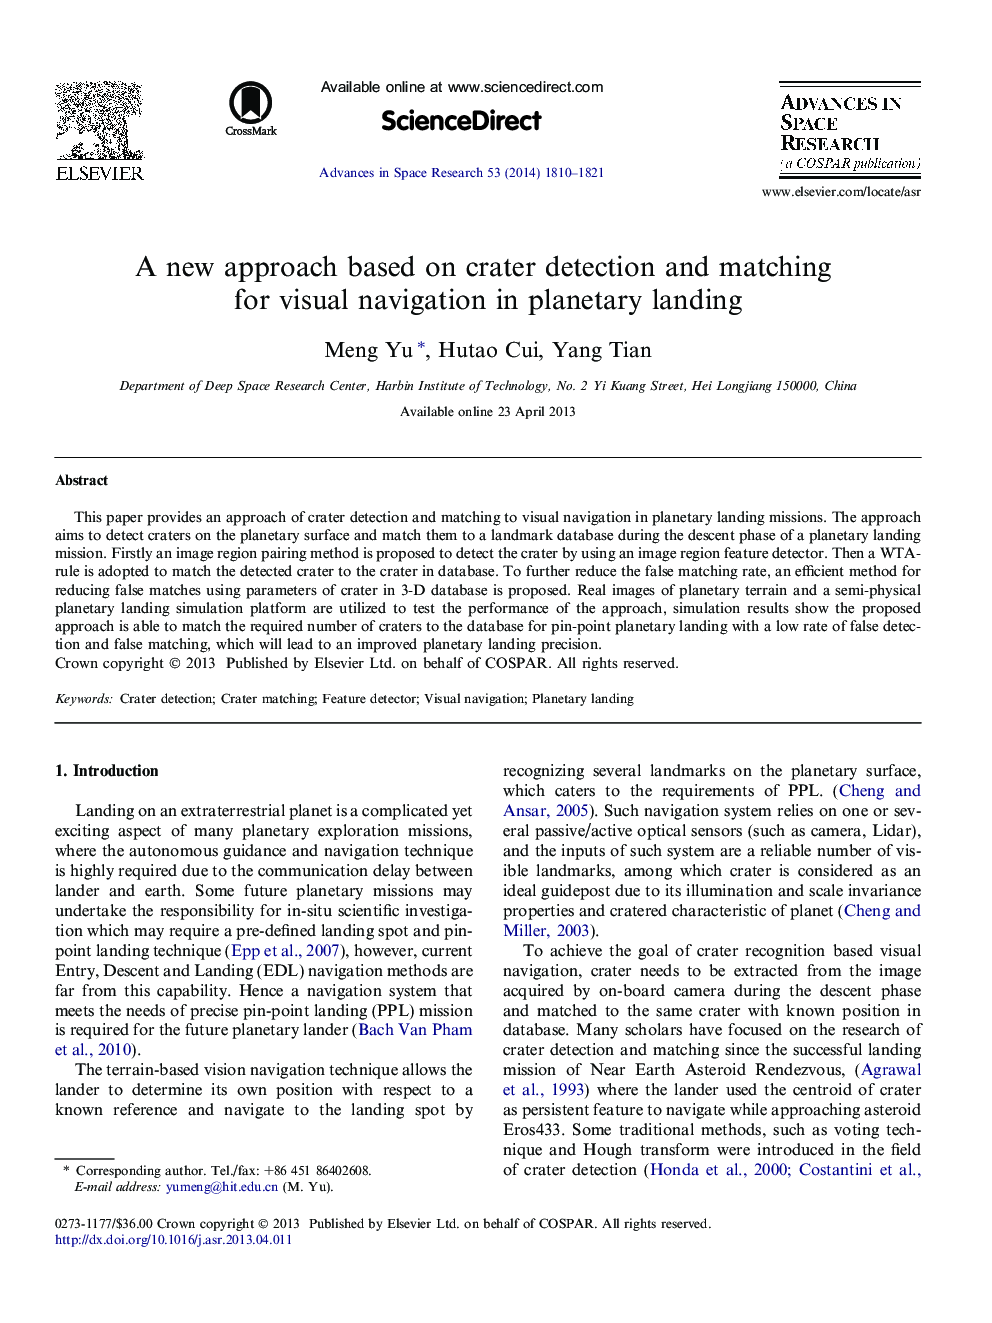 A new approach based on crater detection and matching for visual navigation in planetary landing